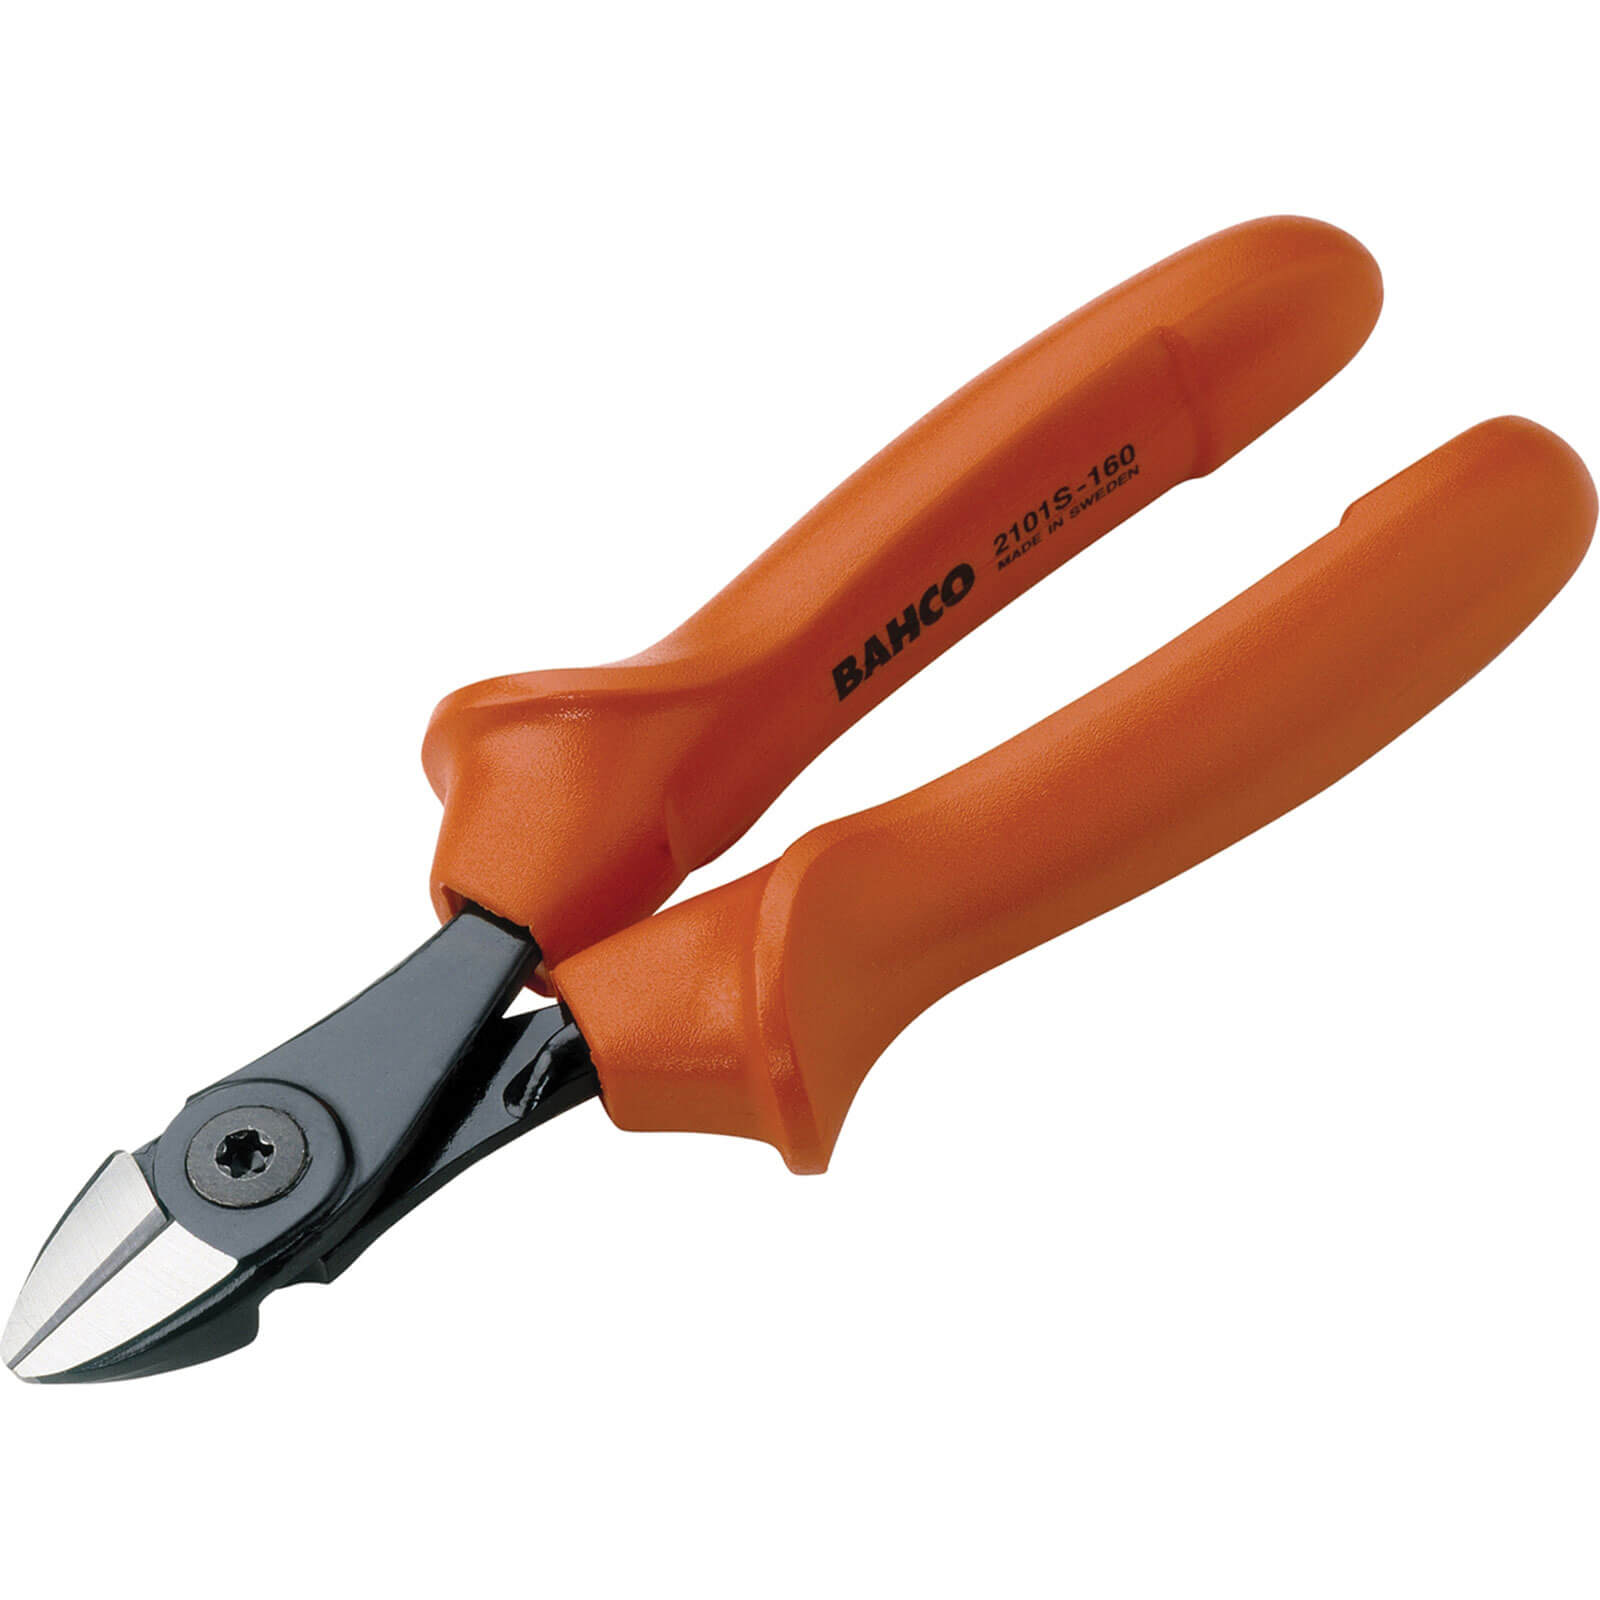 Bahco 2101S-140 Ergo Ins Side Cutting Pliers